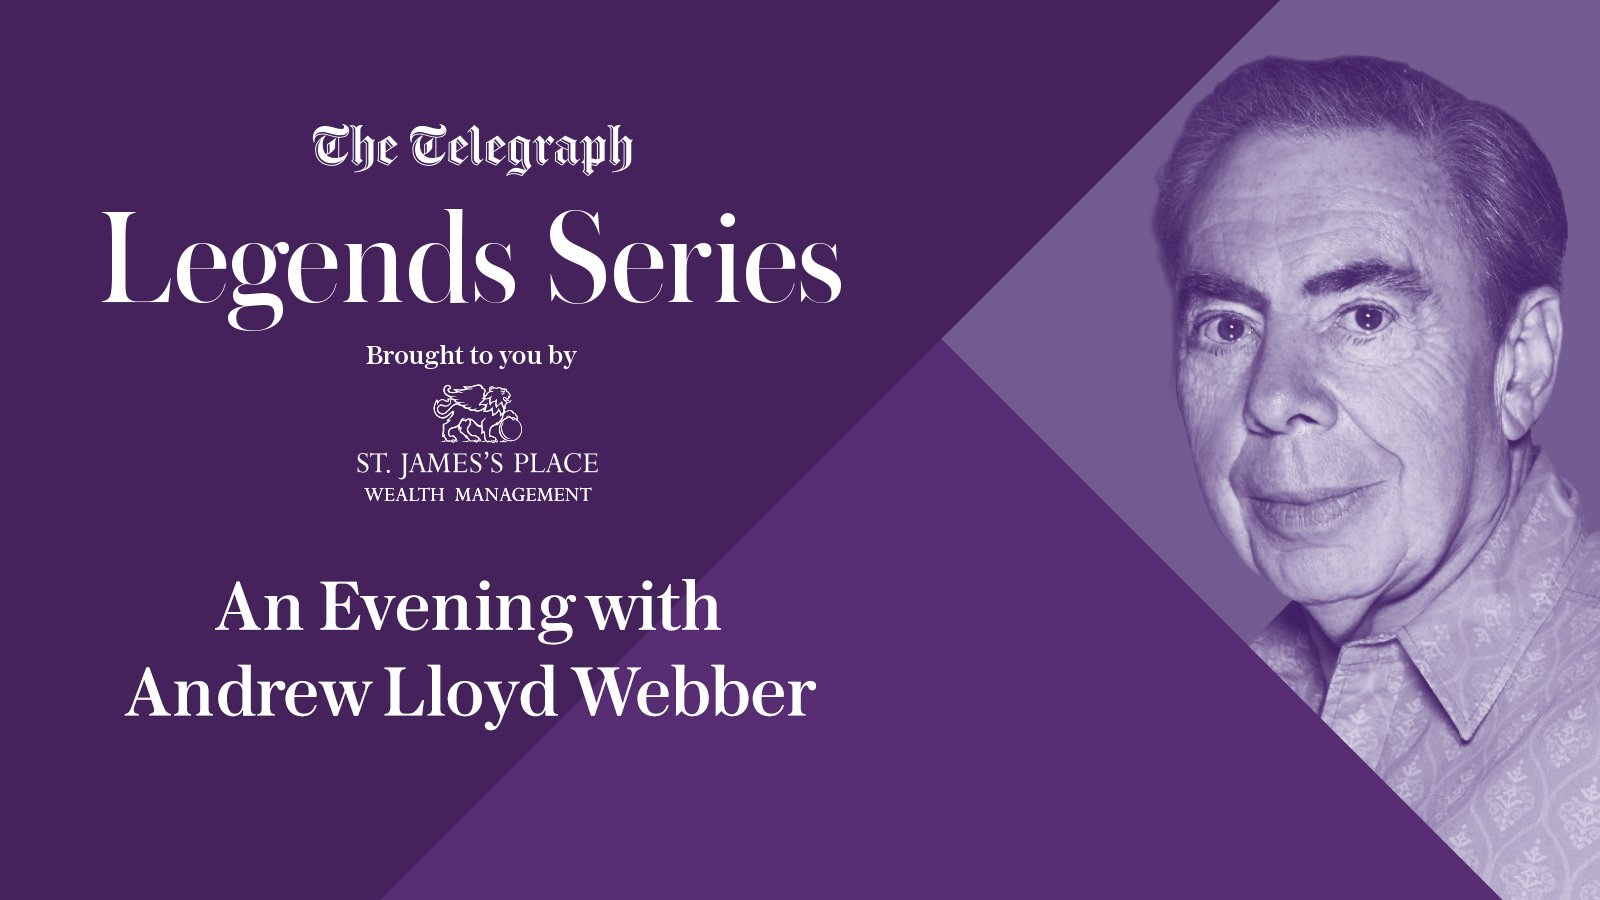 Andrew Lloyd Webber On Join March 13th At The